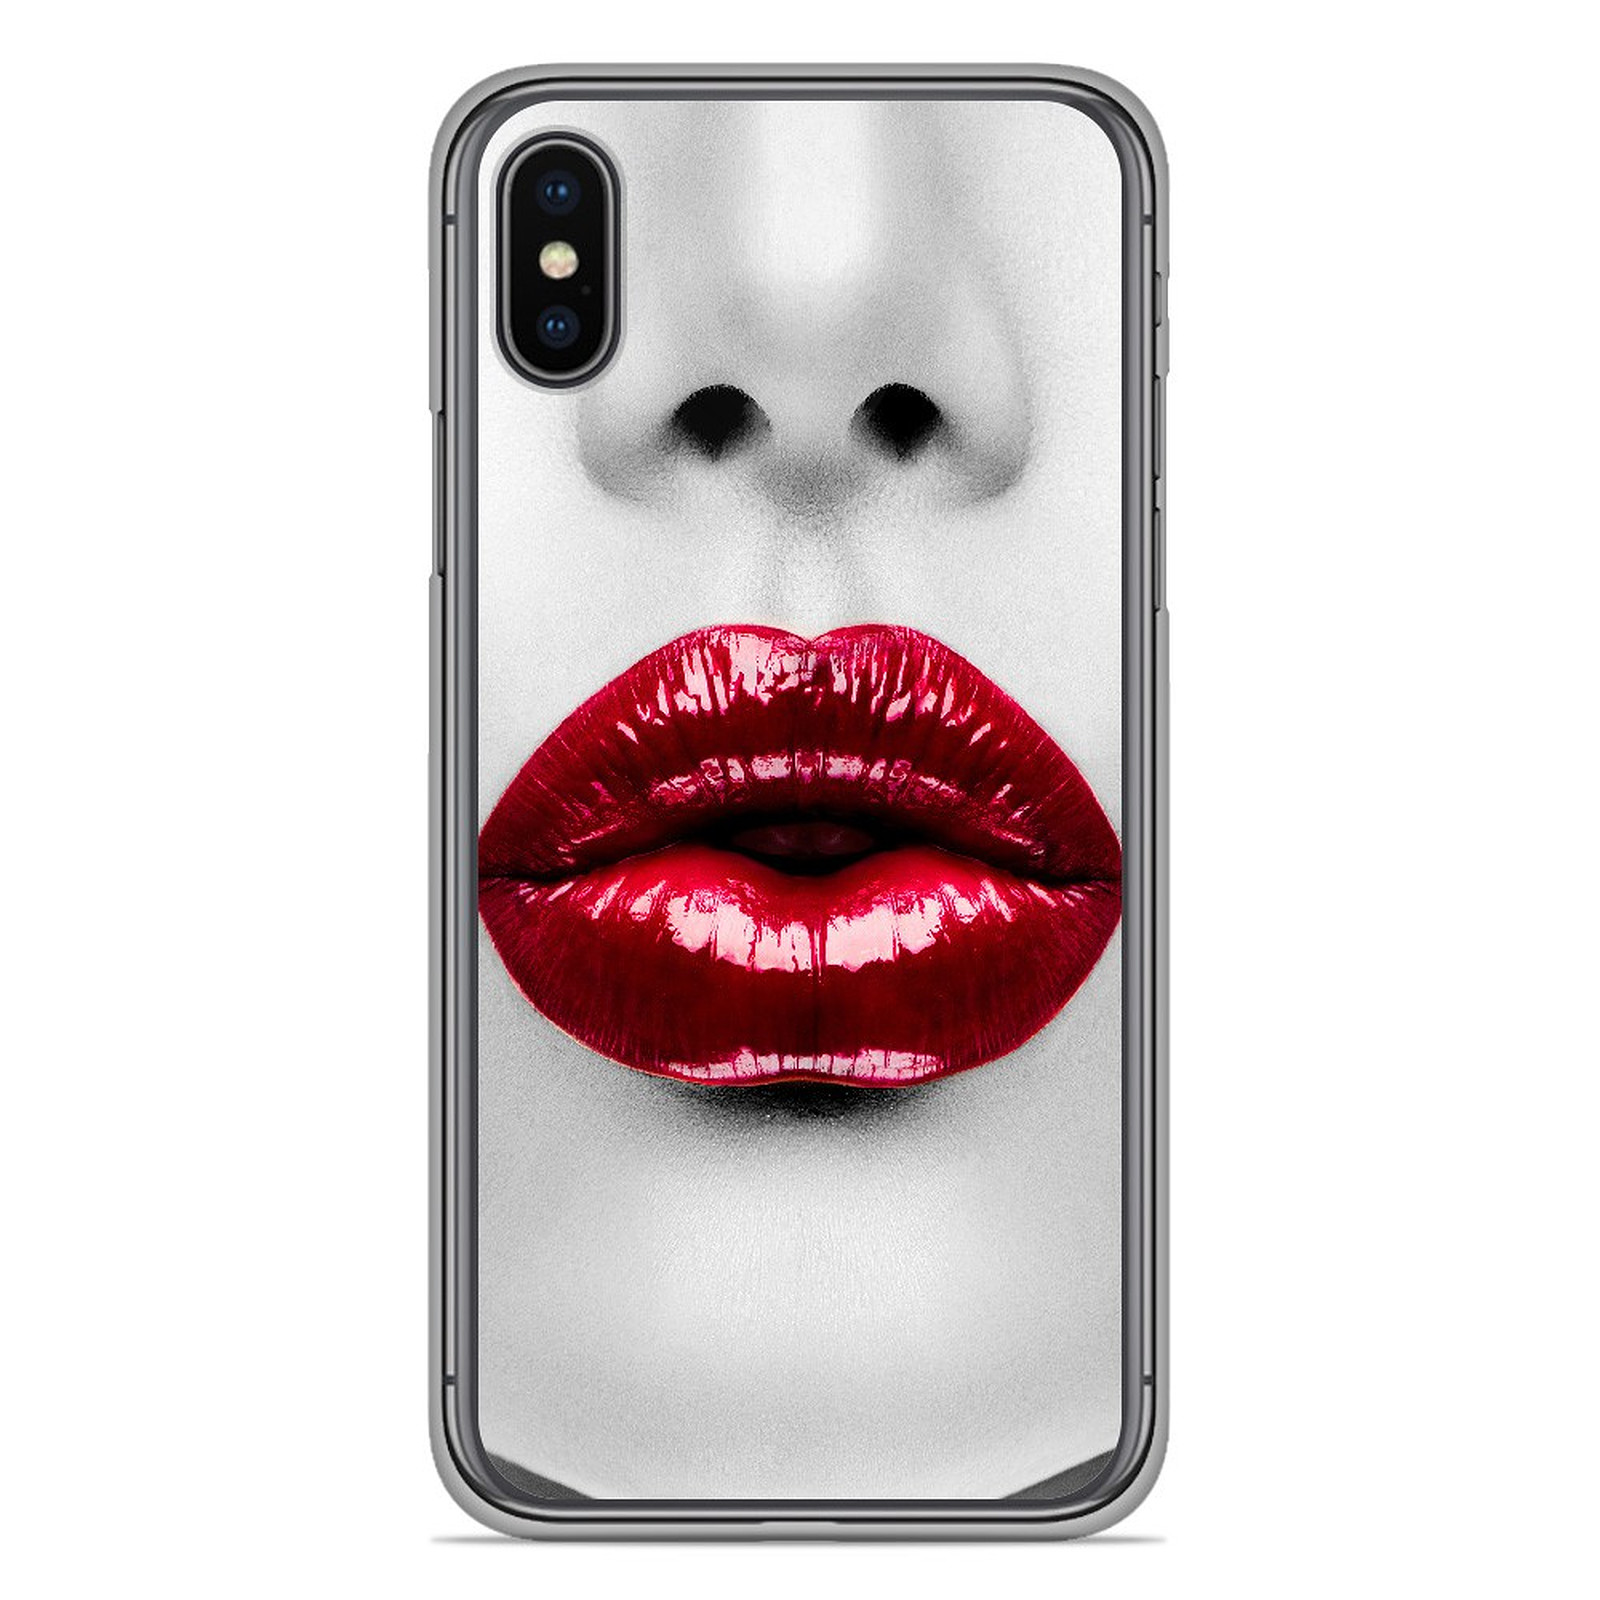 1001 Coques Coque silicone gel Apple iPhone XS Max motif Lèvres Rouges - Coque telephone 1001Coques